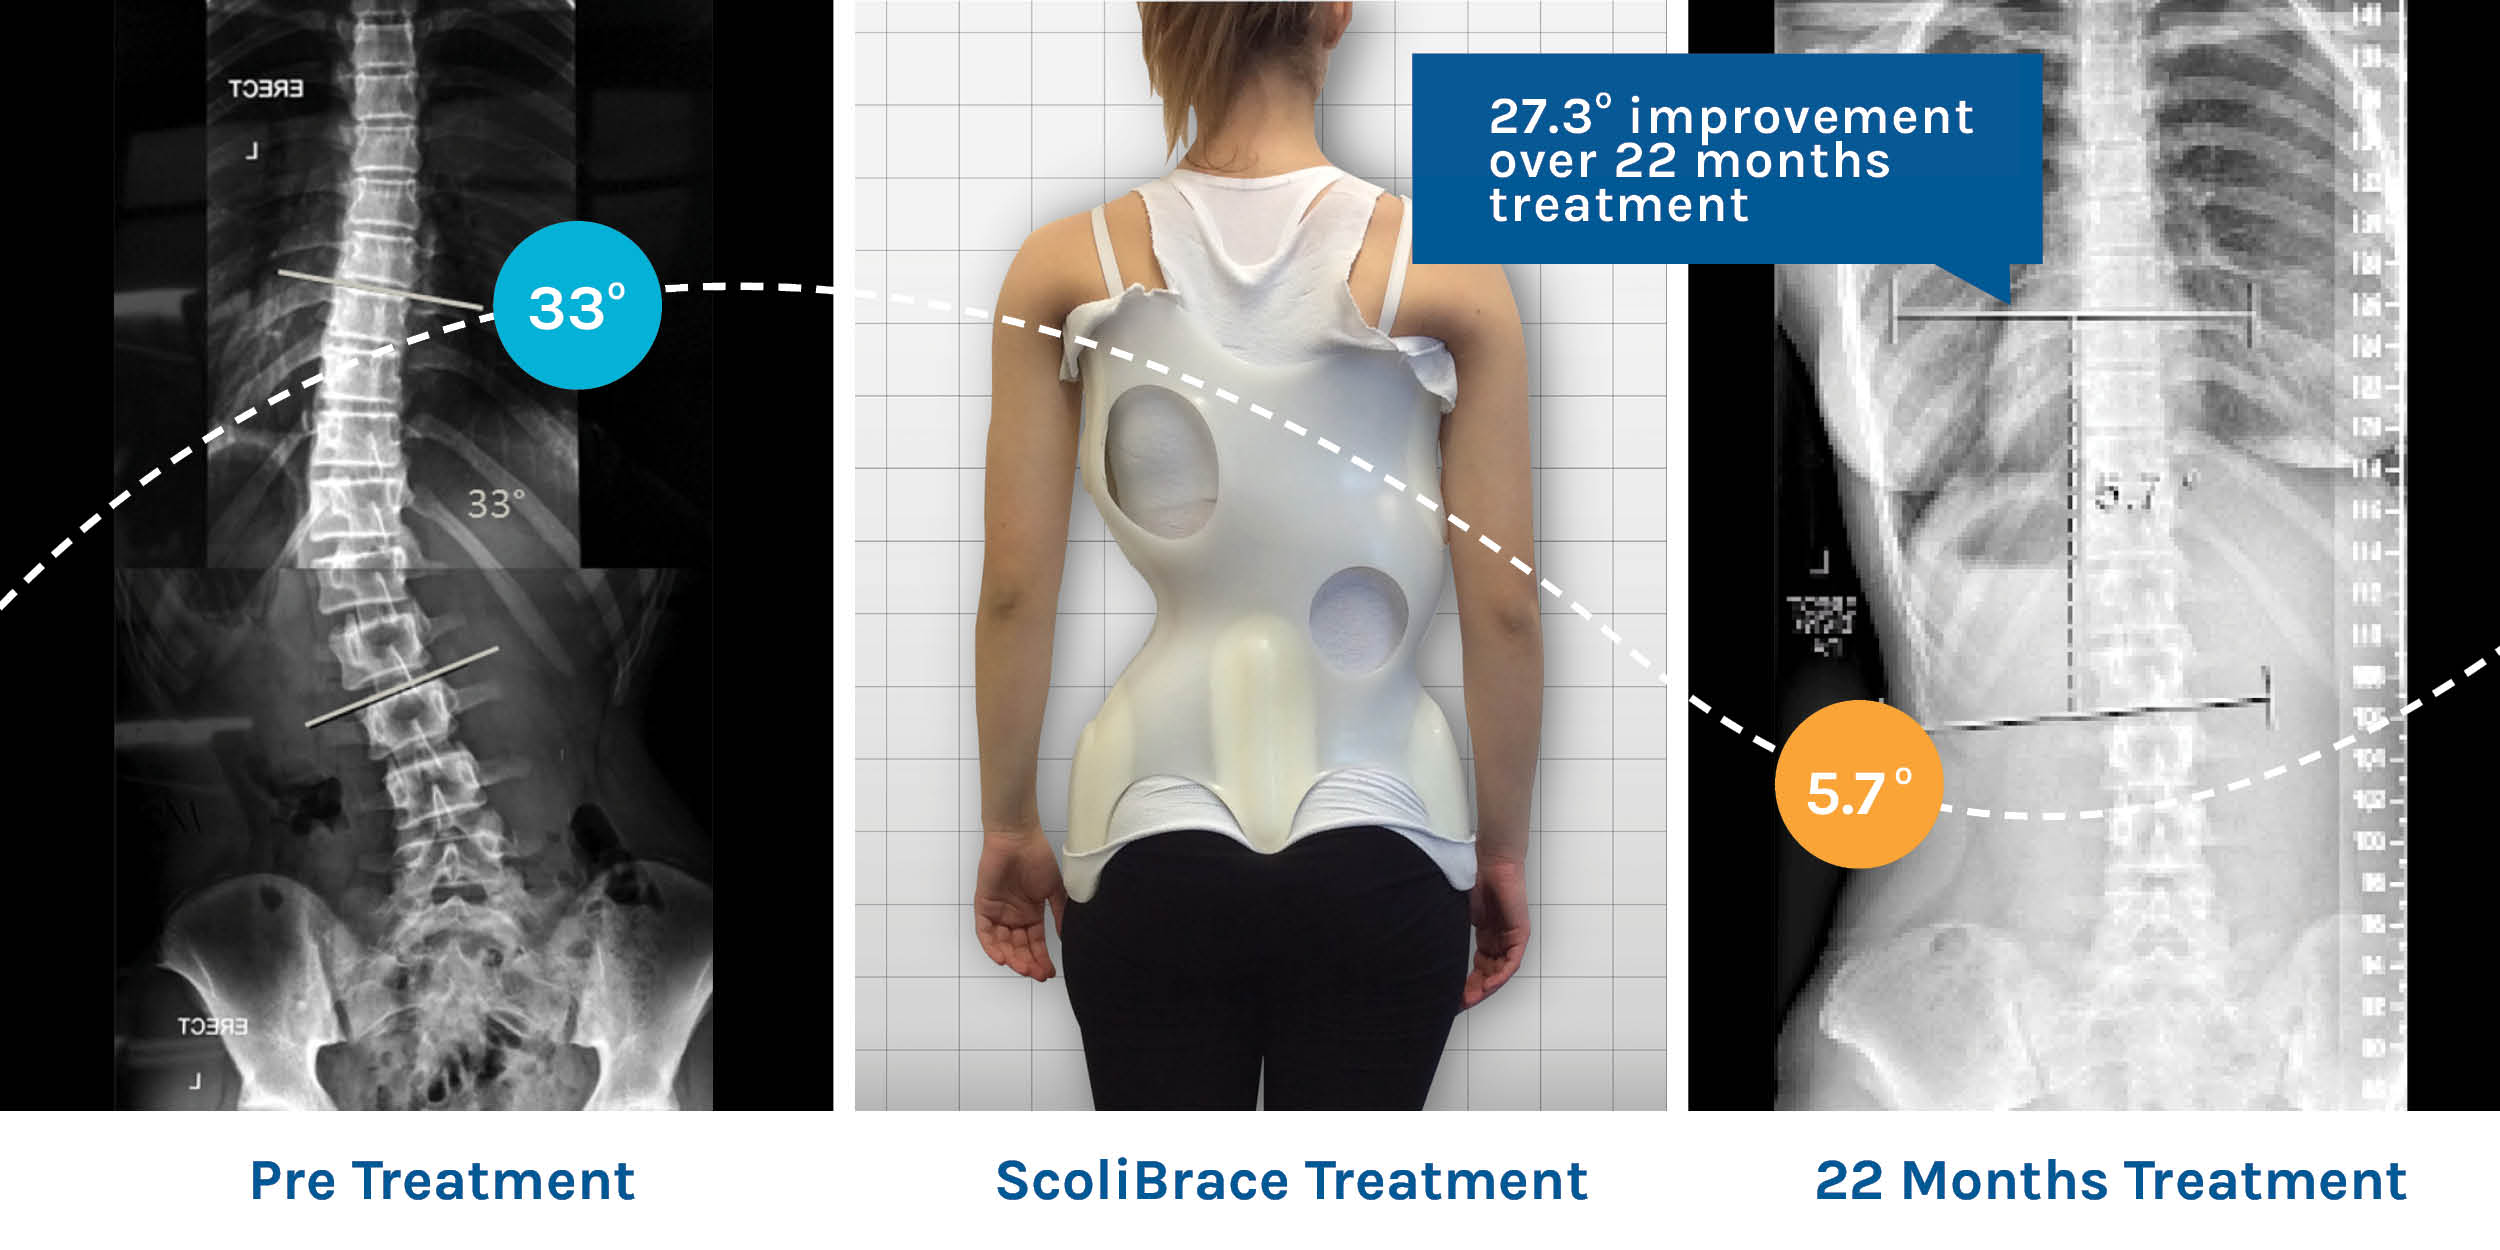 Scolibrace is patient friendly and gets results